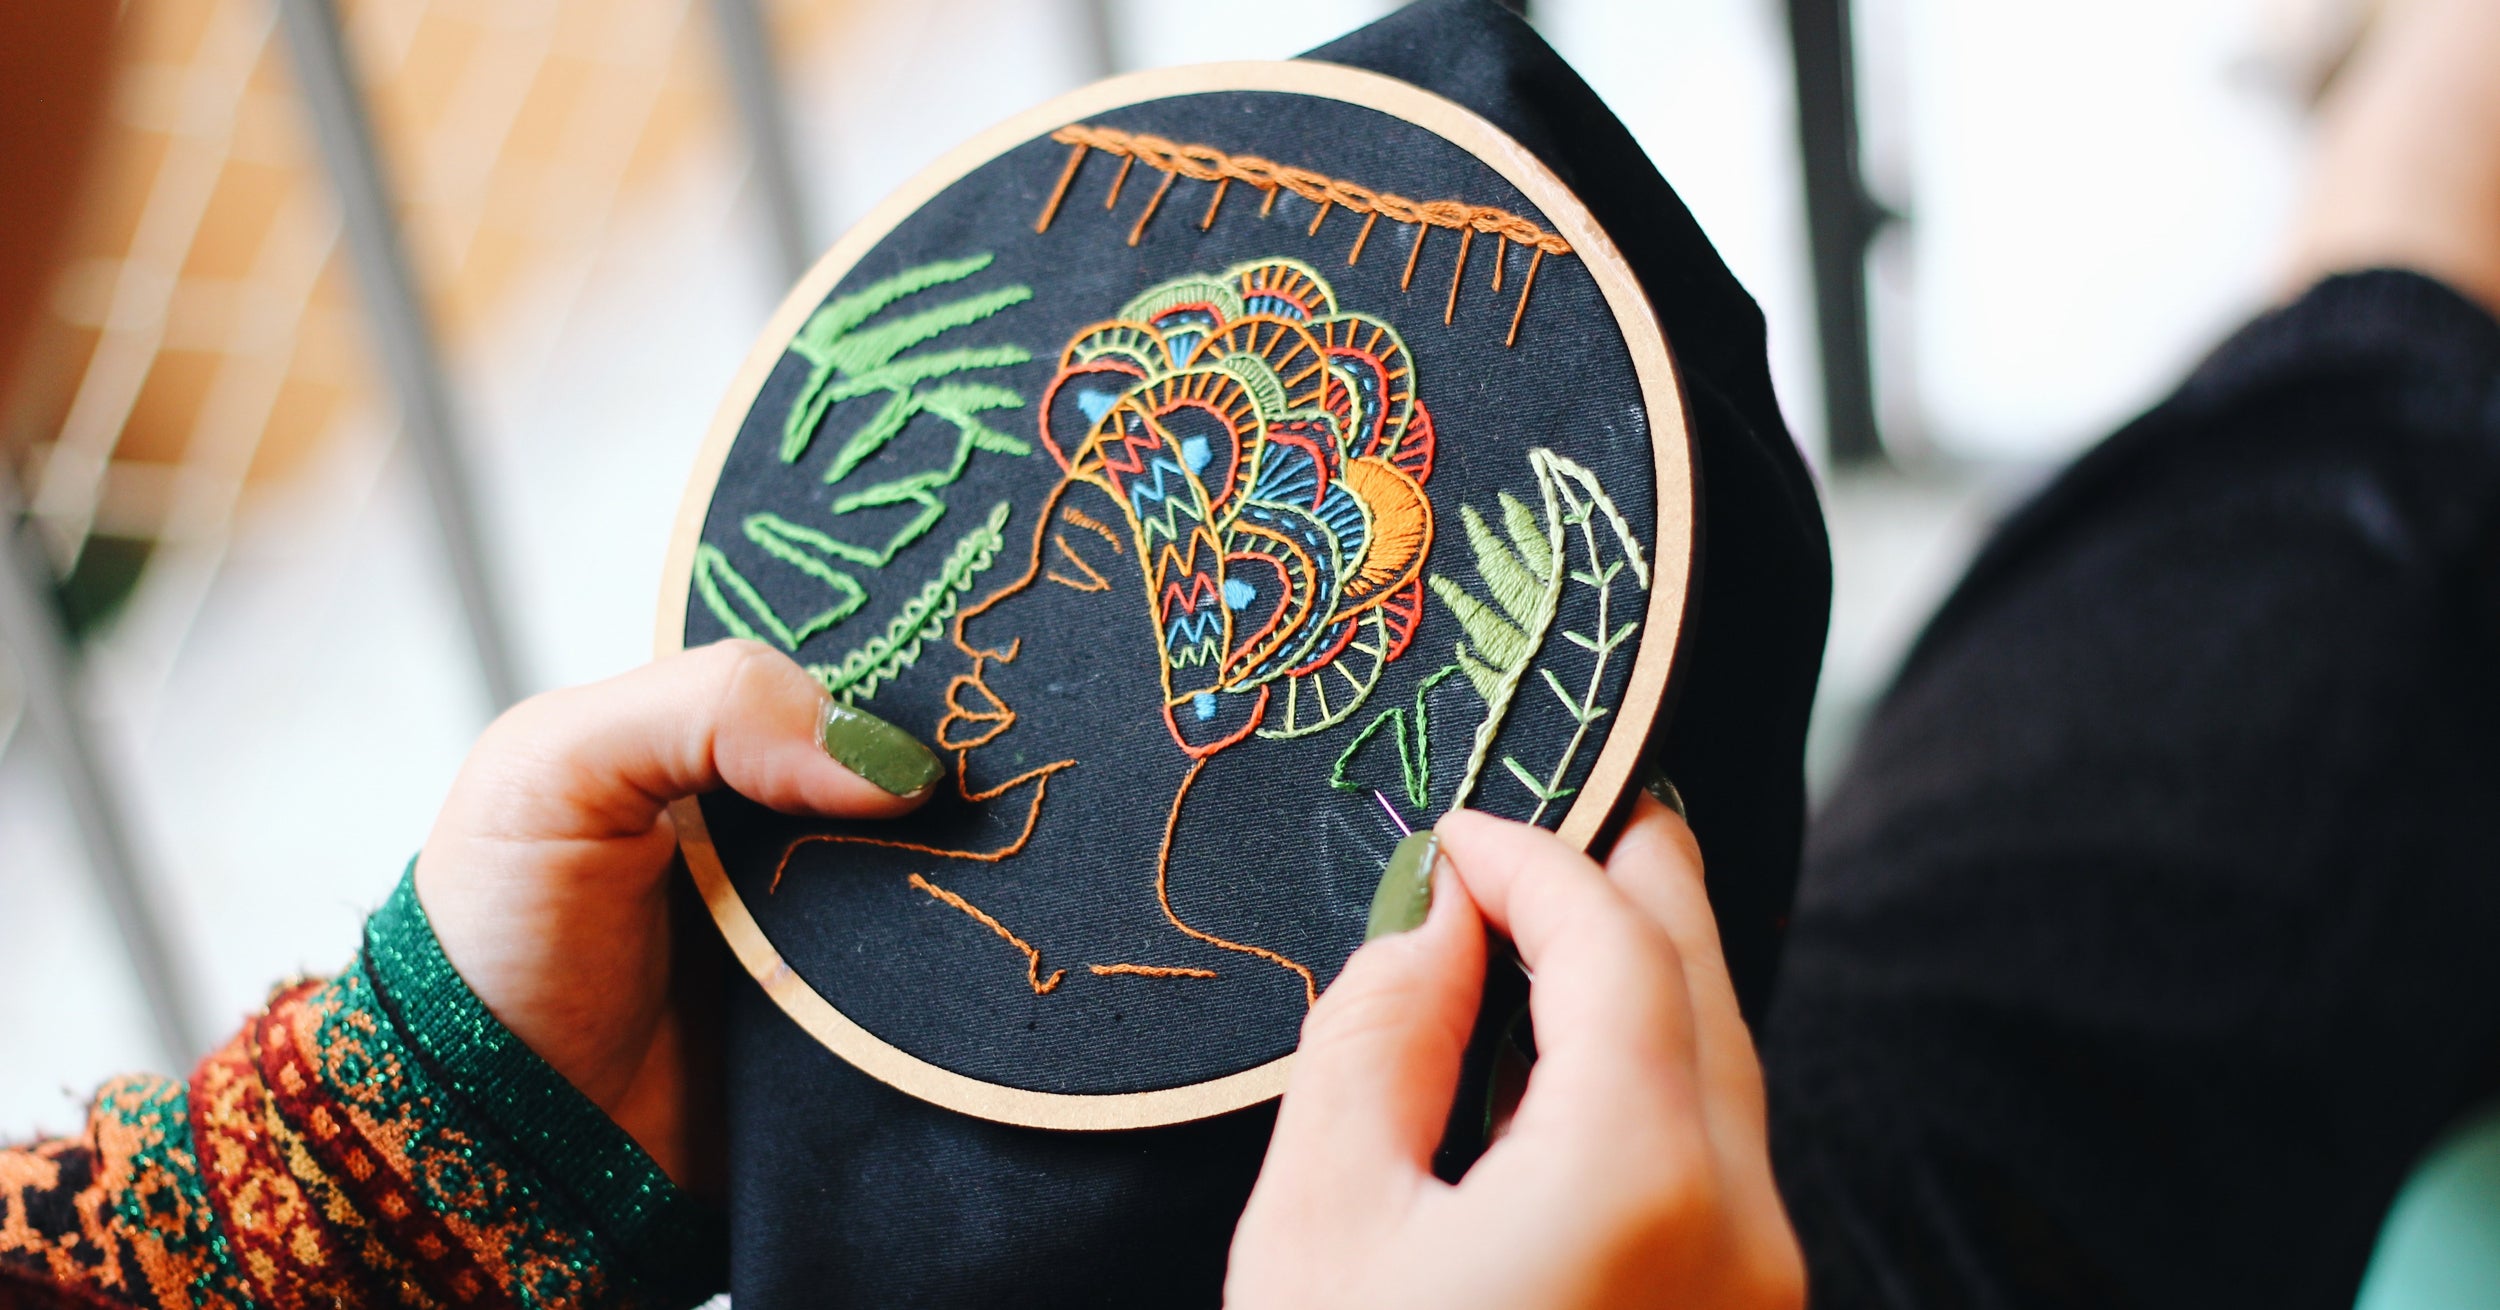 Close up of hands working on an embroidery hoop, creating a design of a person with colorful thread on a black background